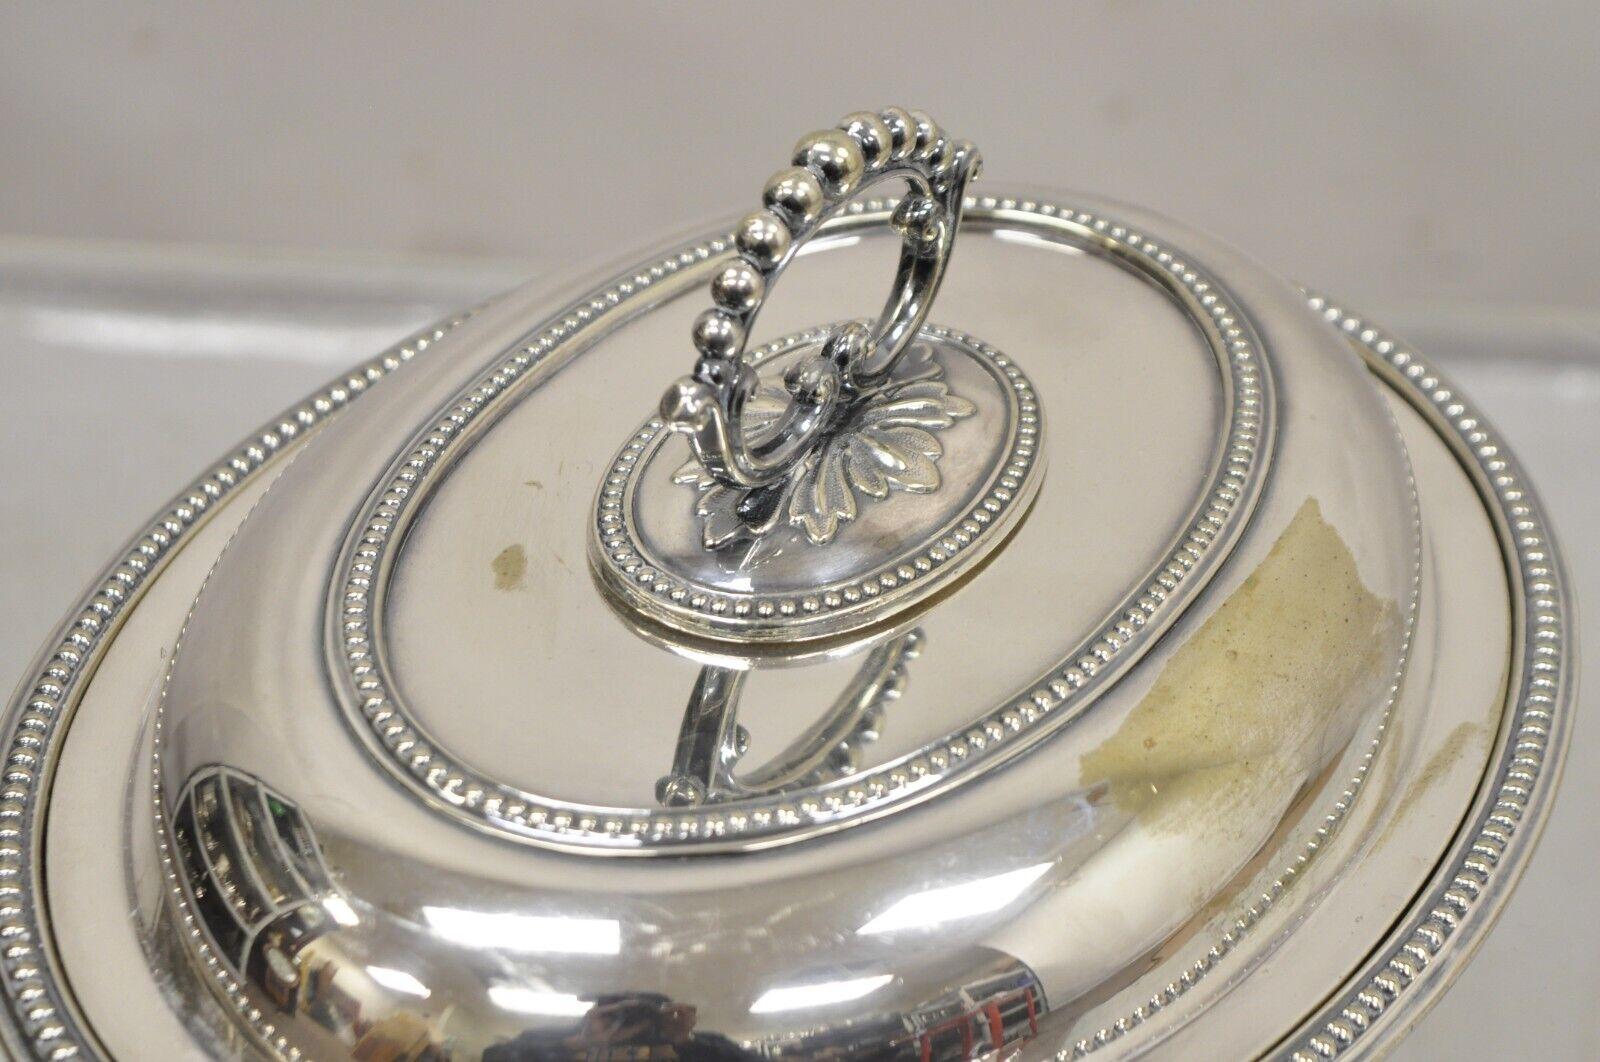 Plaqué argent Mappin & Webb's Prince's Plate English Sheffield Silver Plated Covered Dish (Plat couvert en argent) en vente